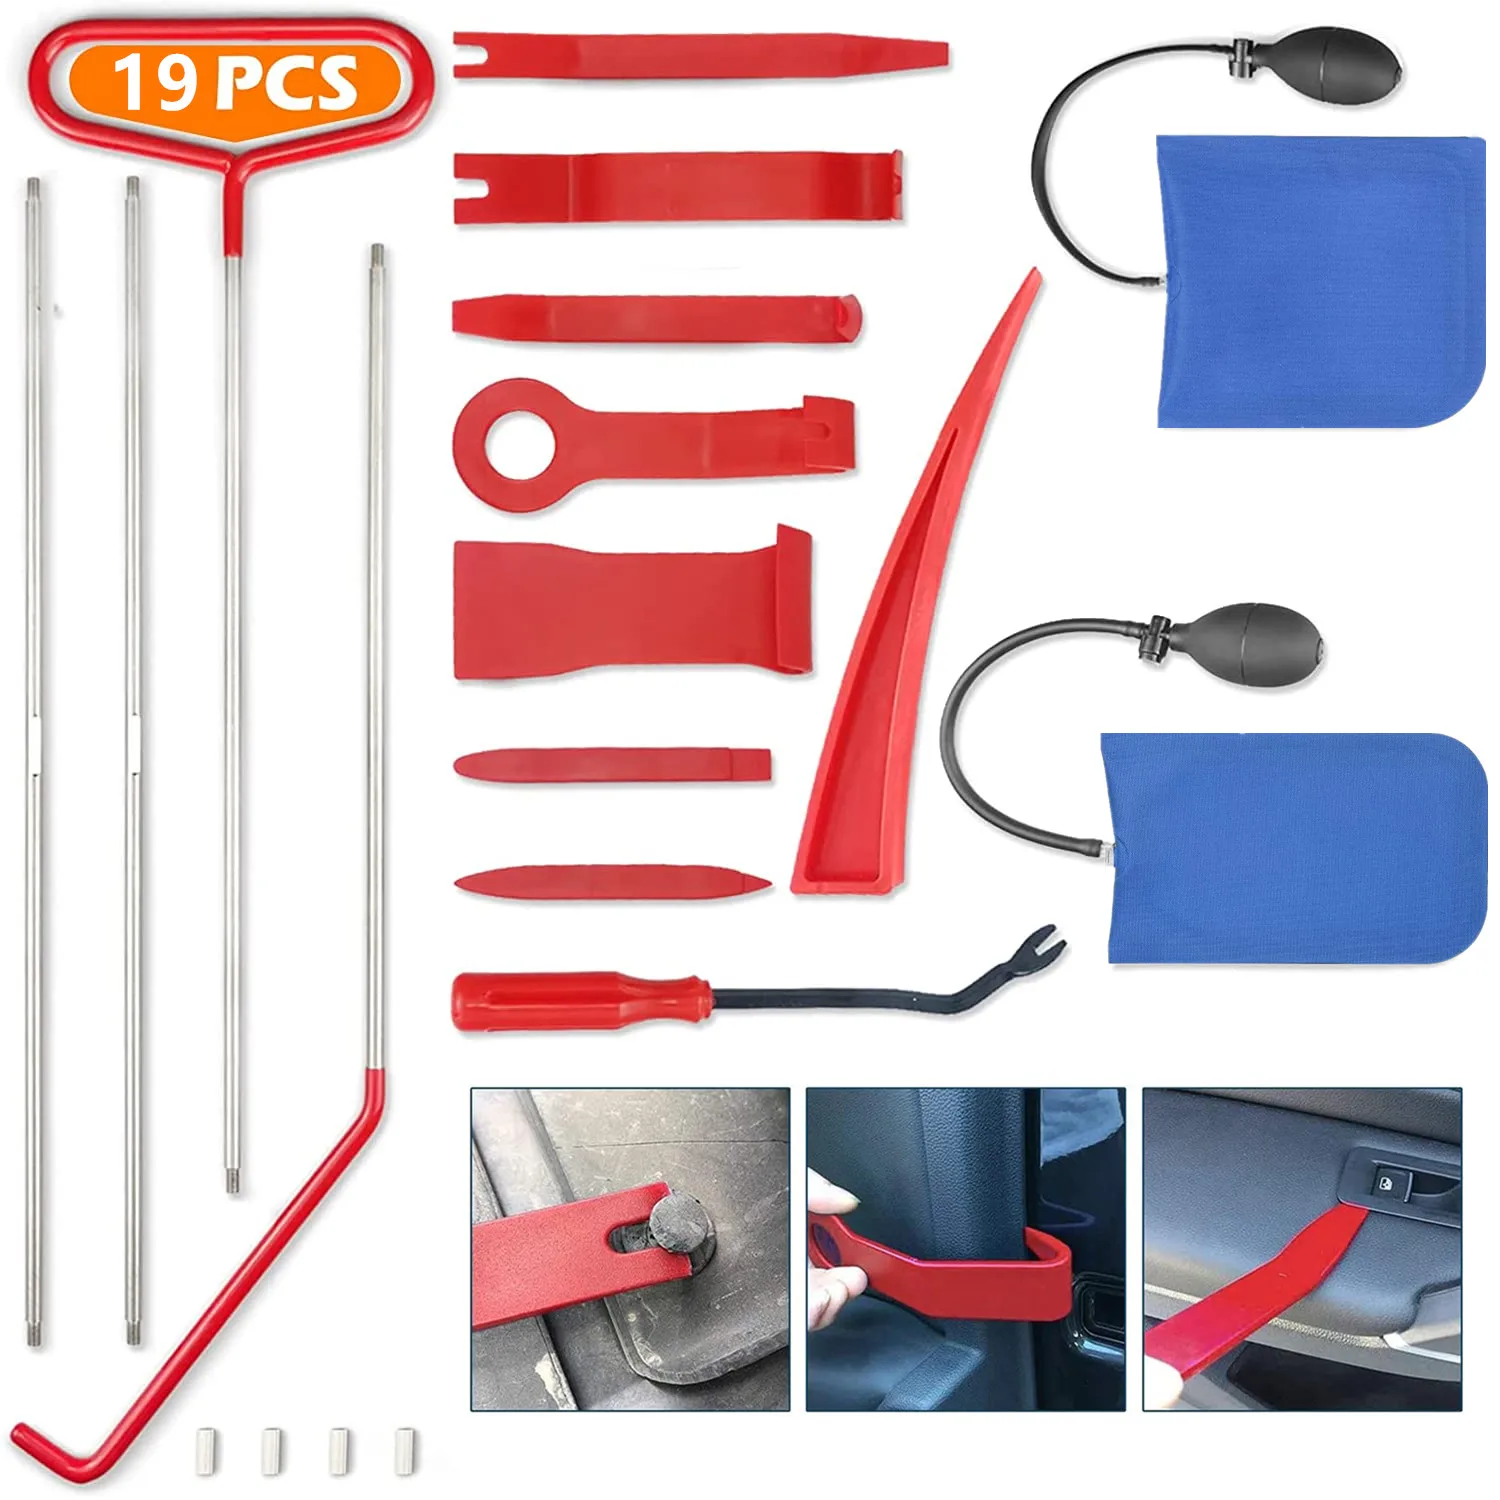 Car Lockout Kit Lock Out Kits For Vehicles Car Door Opener Kit With Long Reach Hook Air Wedge Pump Auto Trim Removal Tools Paint Dent Repair Tool Aliexpress